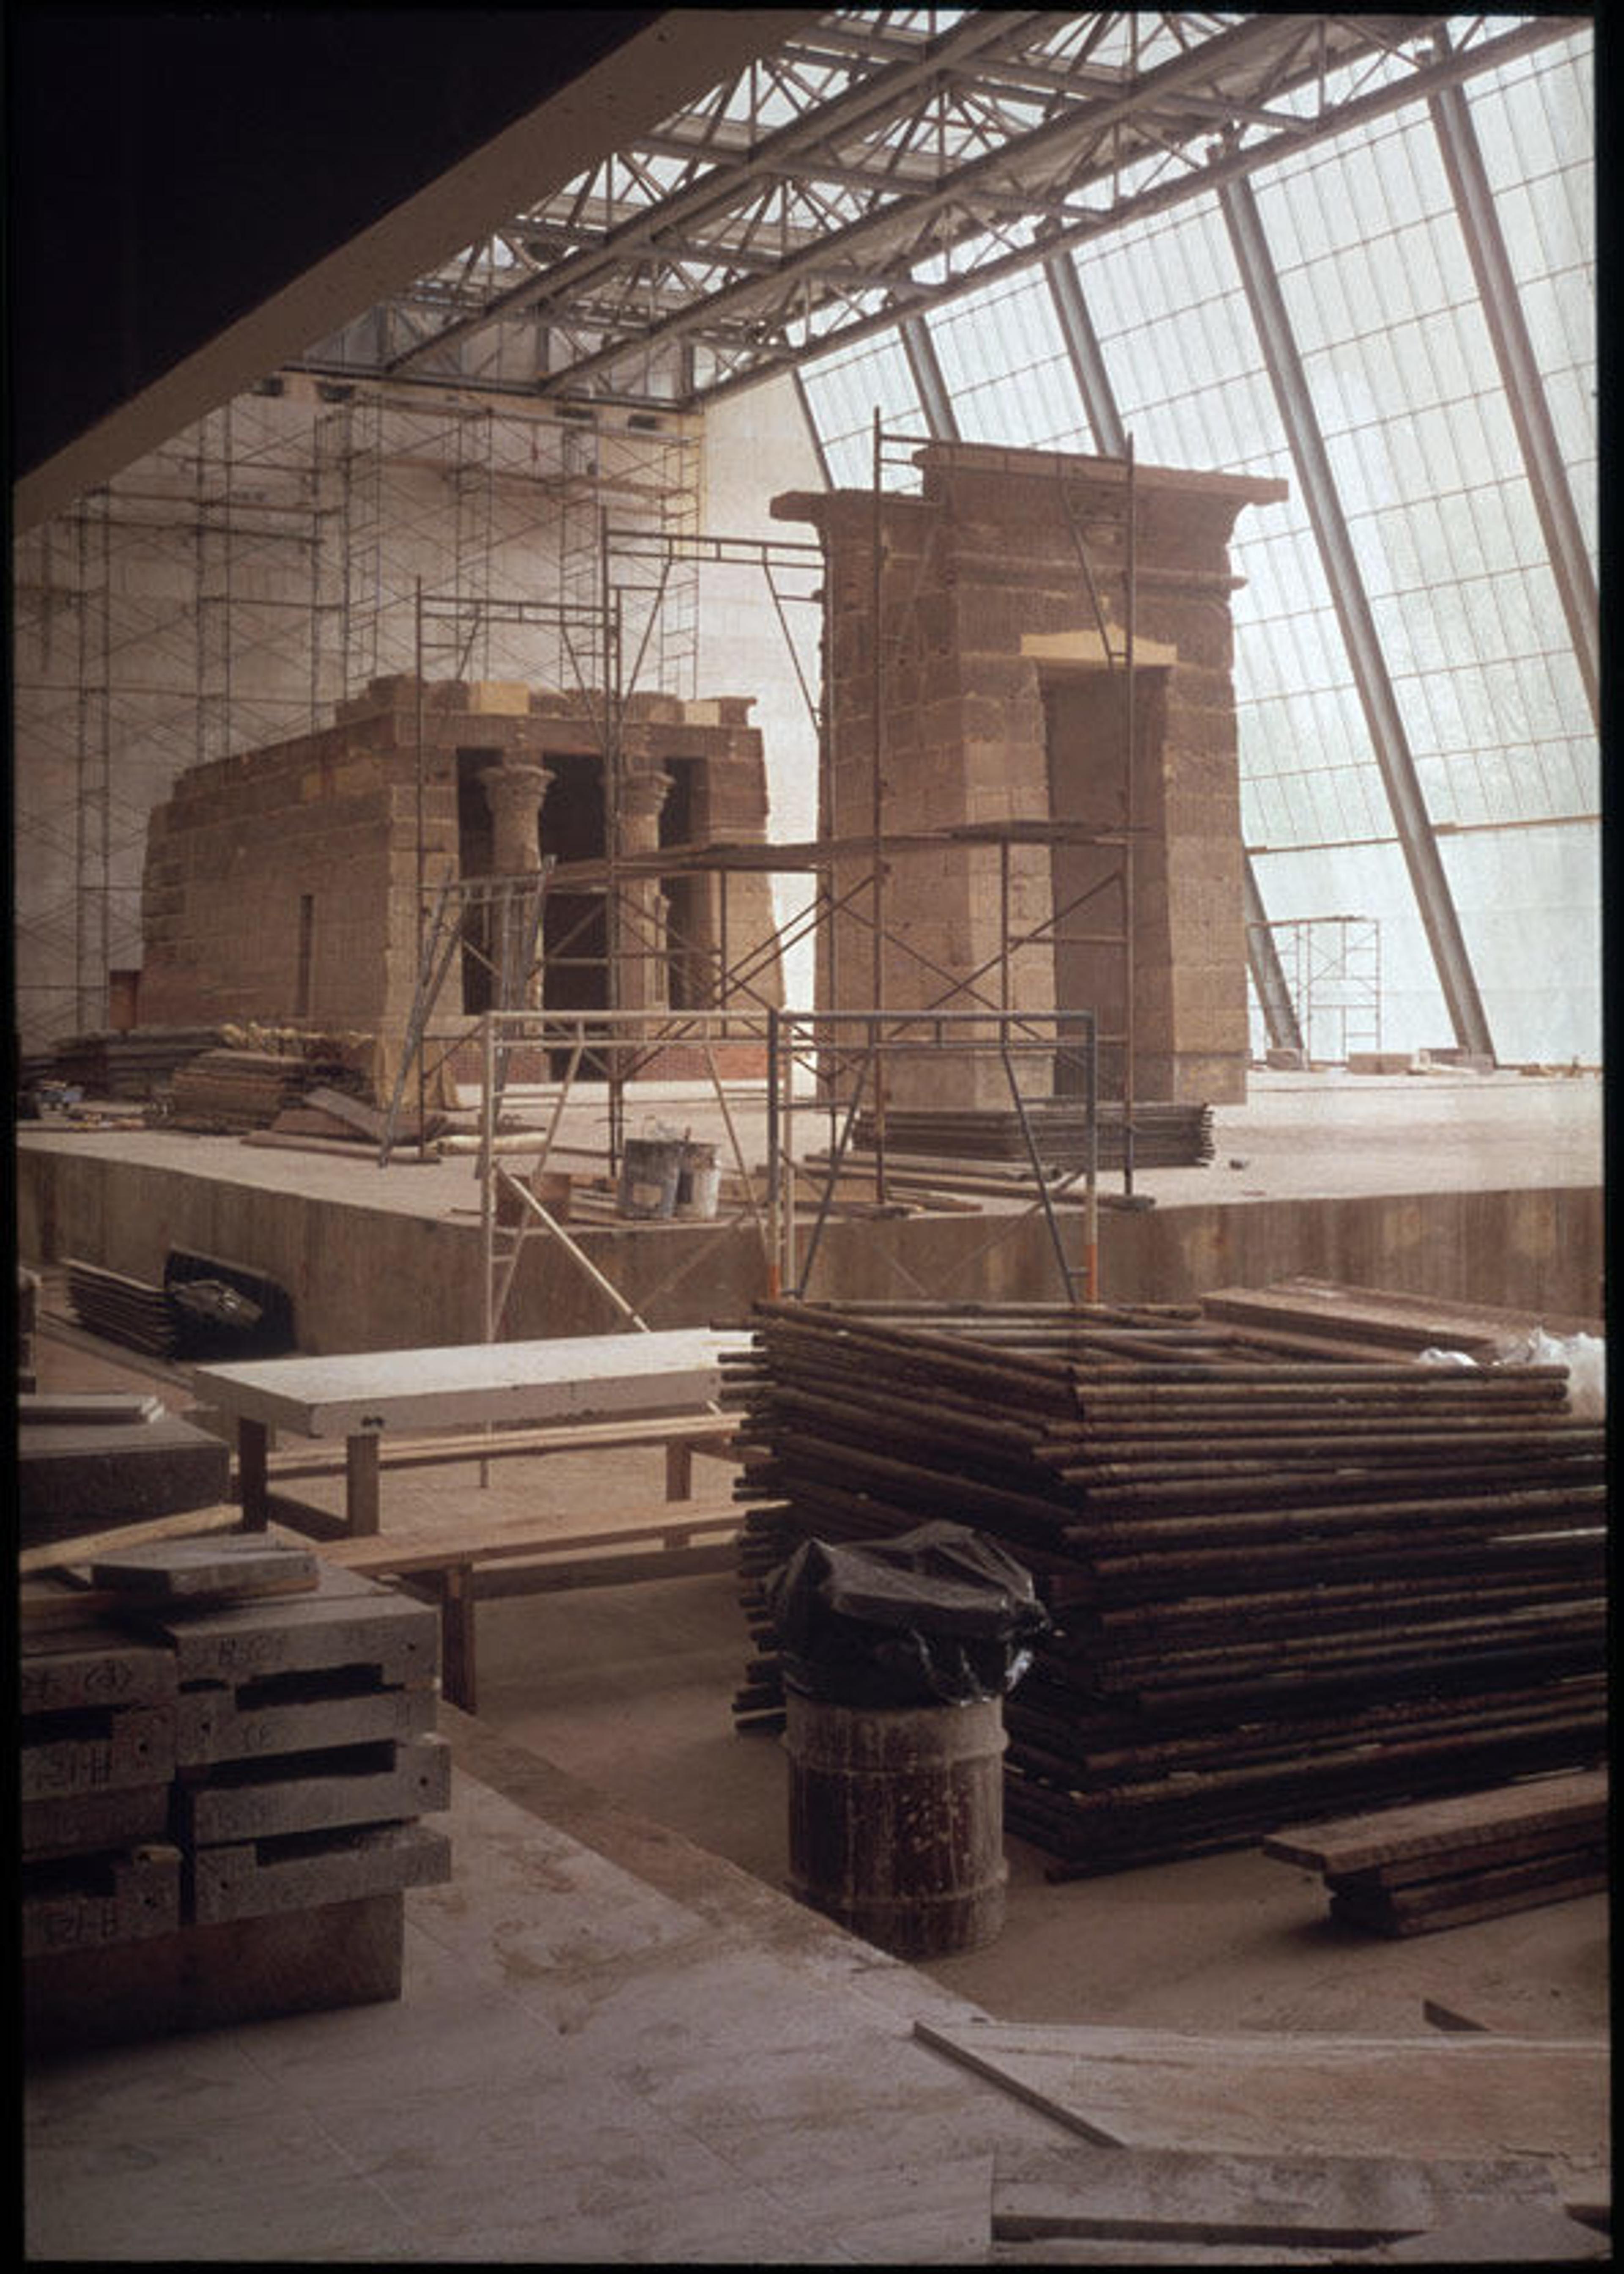 Construction of The Temple of Dendur, Fourth Phase, MMA Installation: general view, south and east sides, with materials and scaffolding in foreground